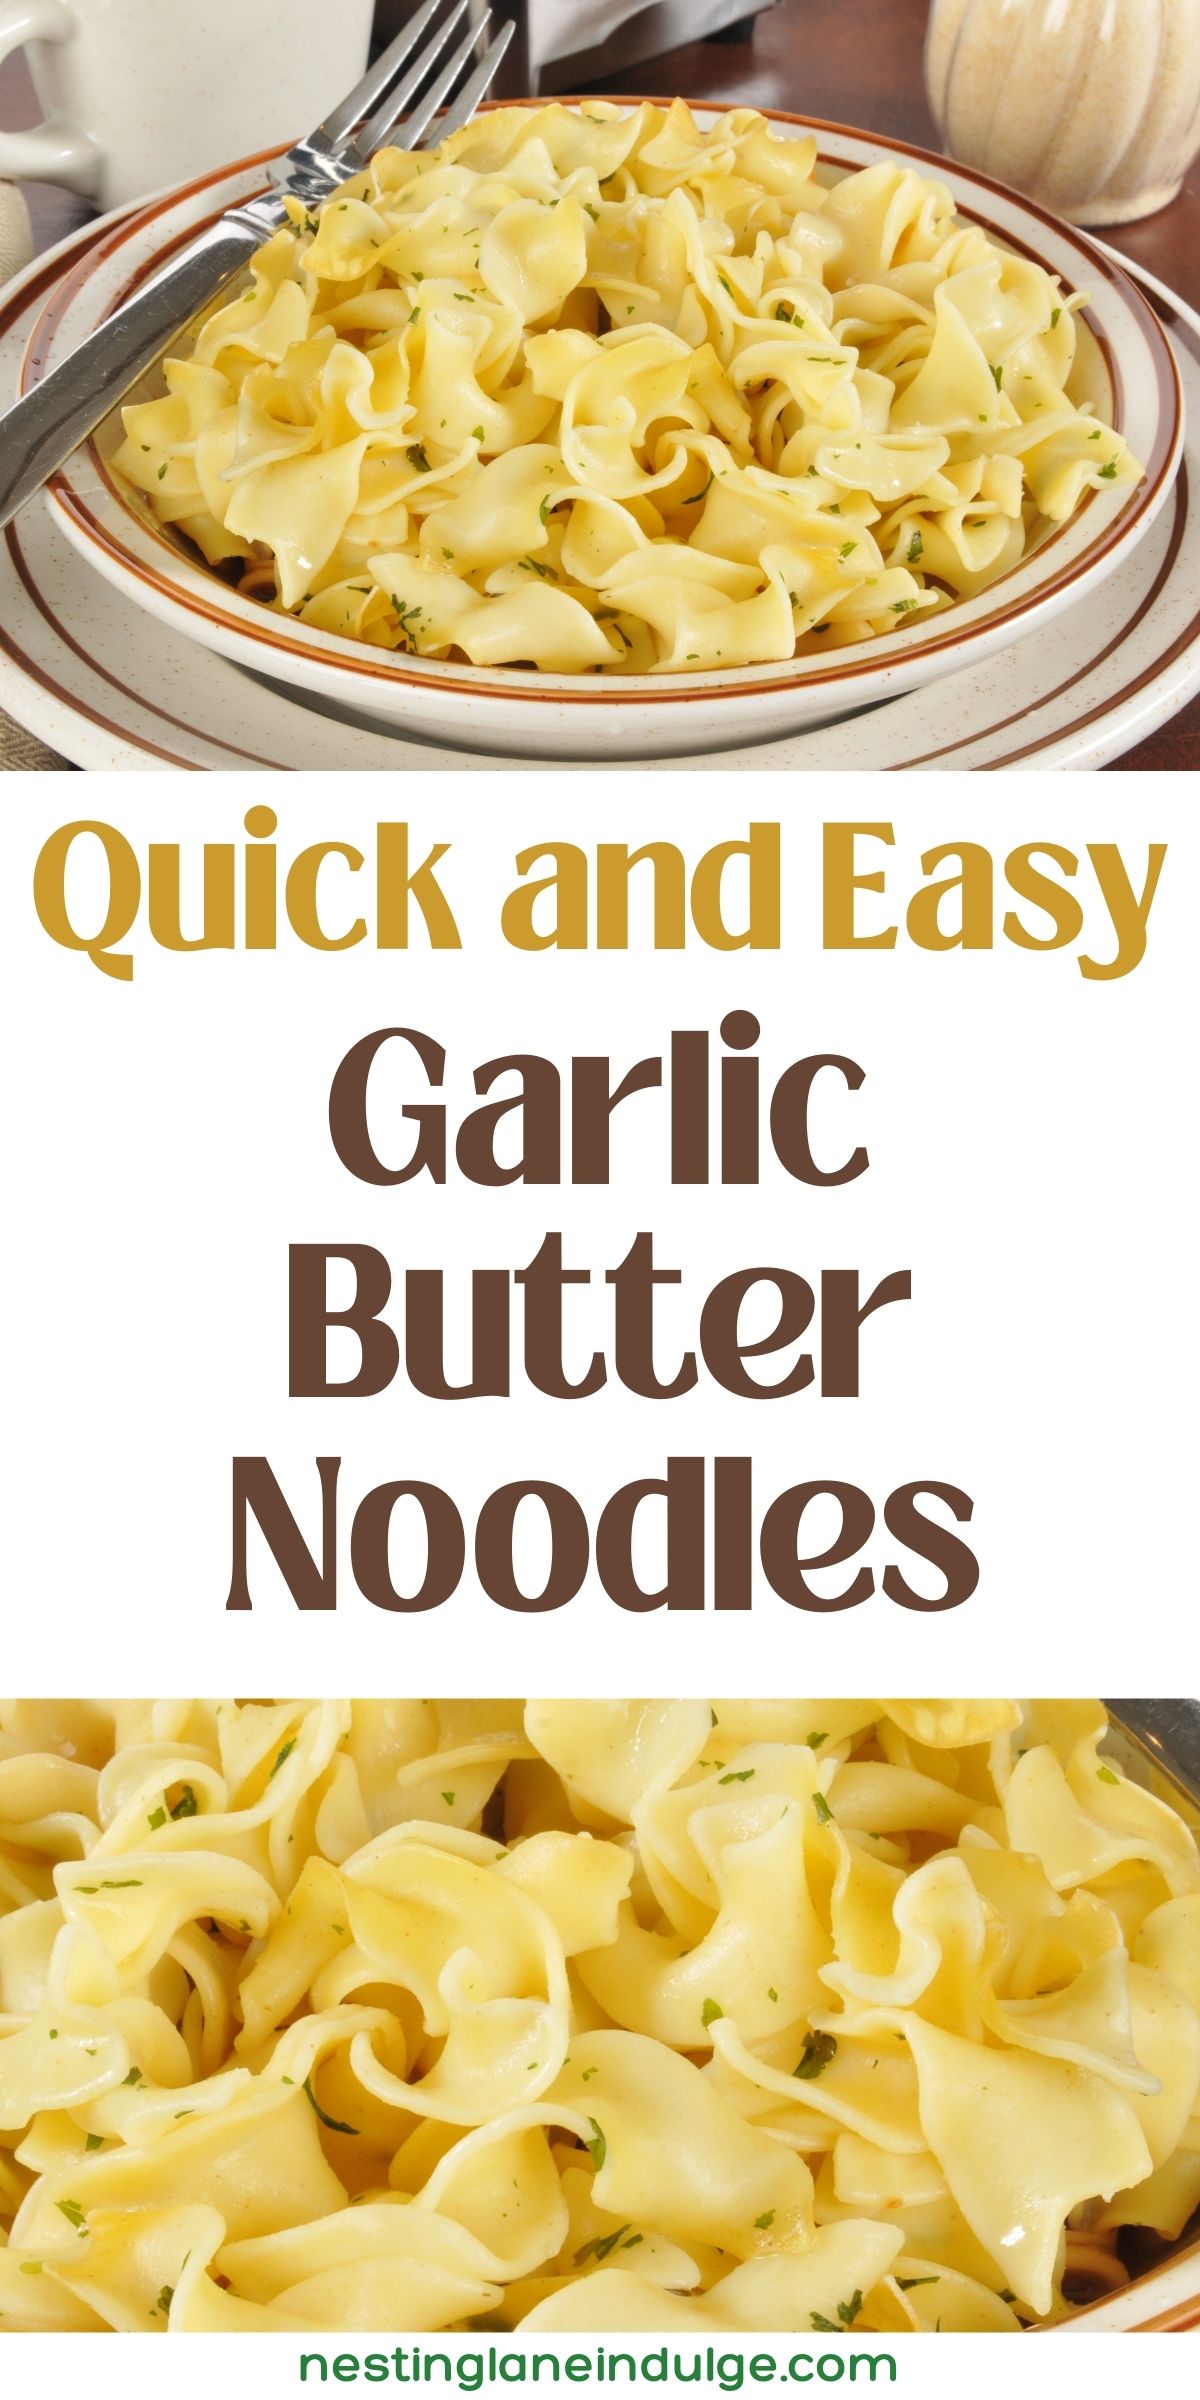 Quick Garlic Butter Noodles Recipe Graphic.